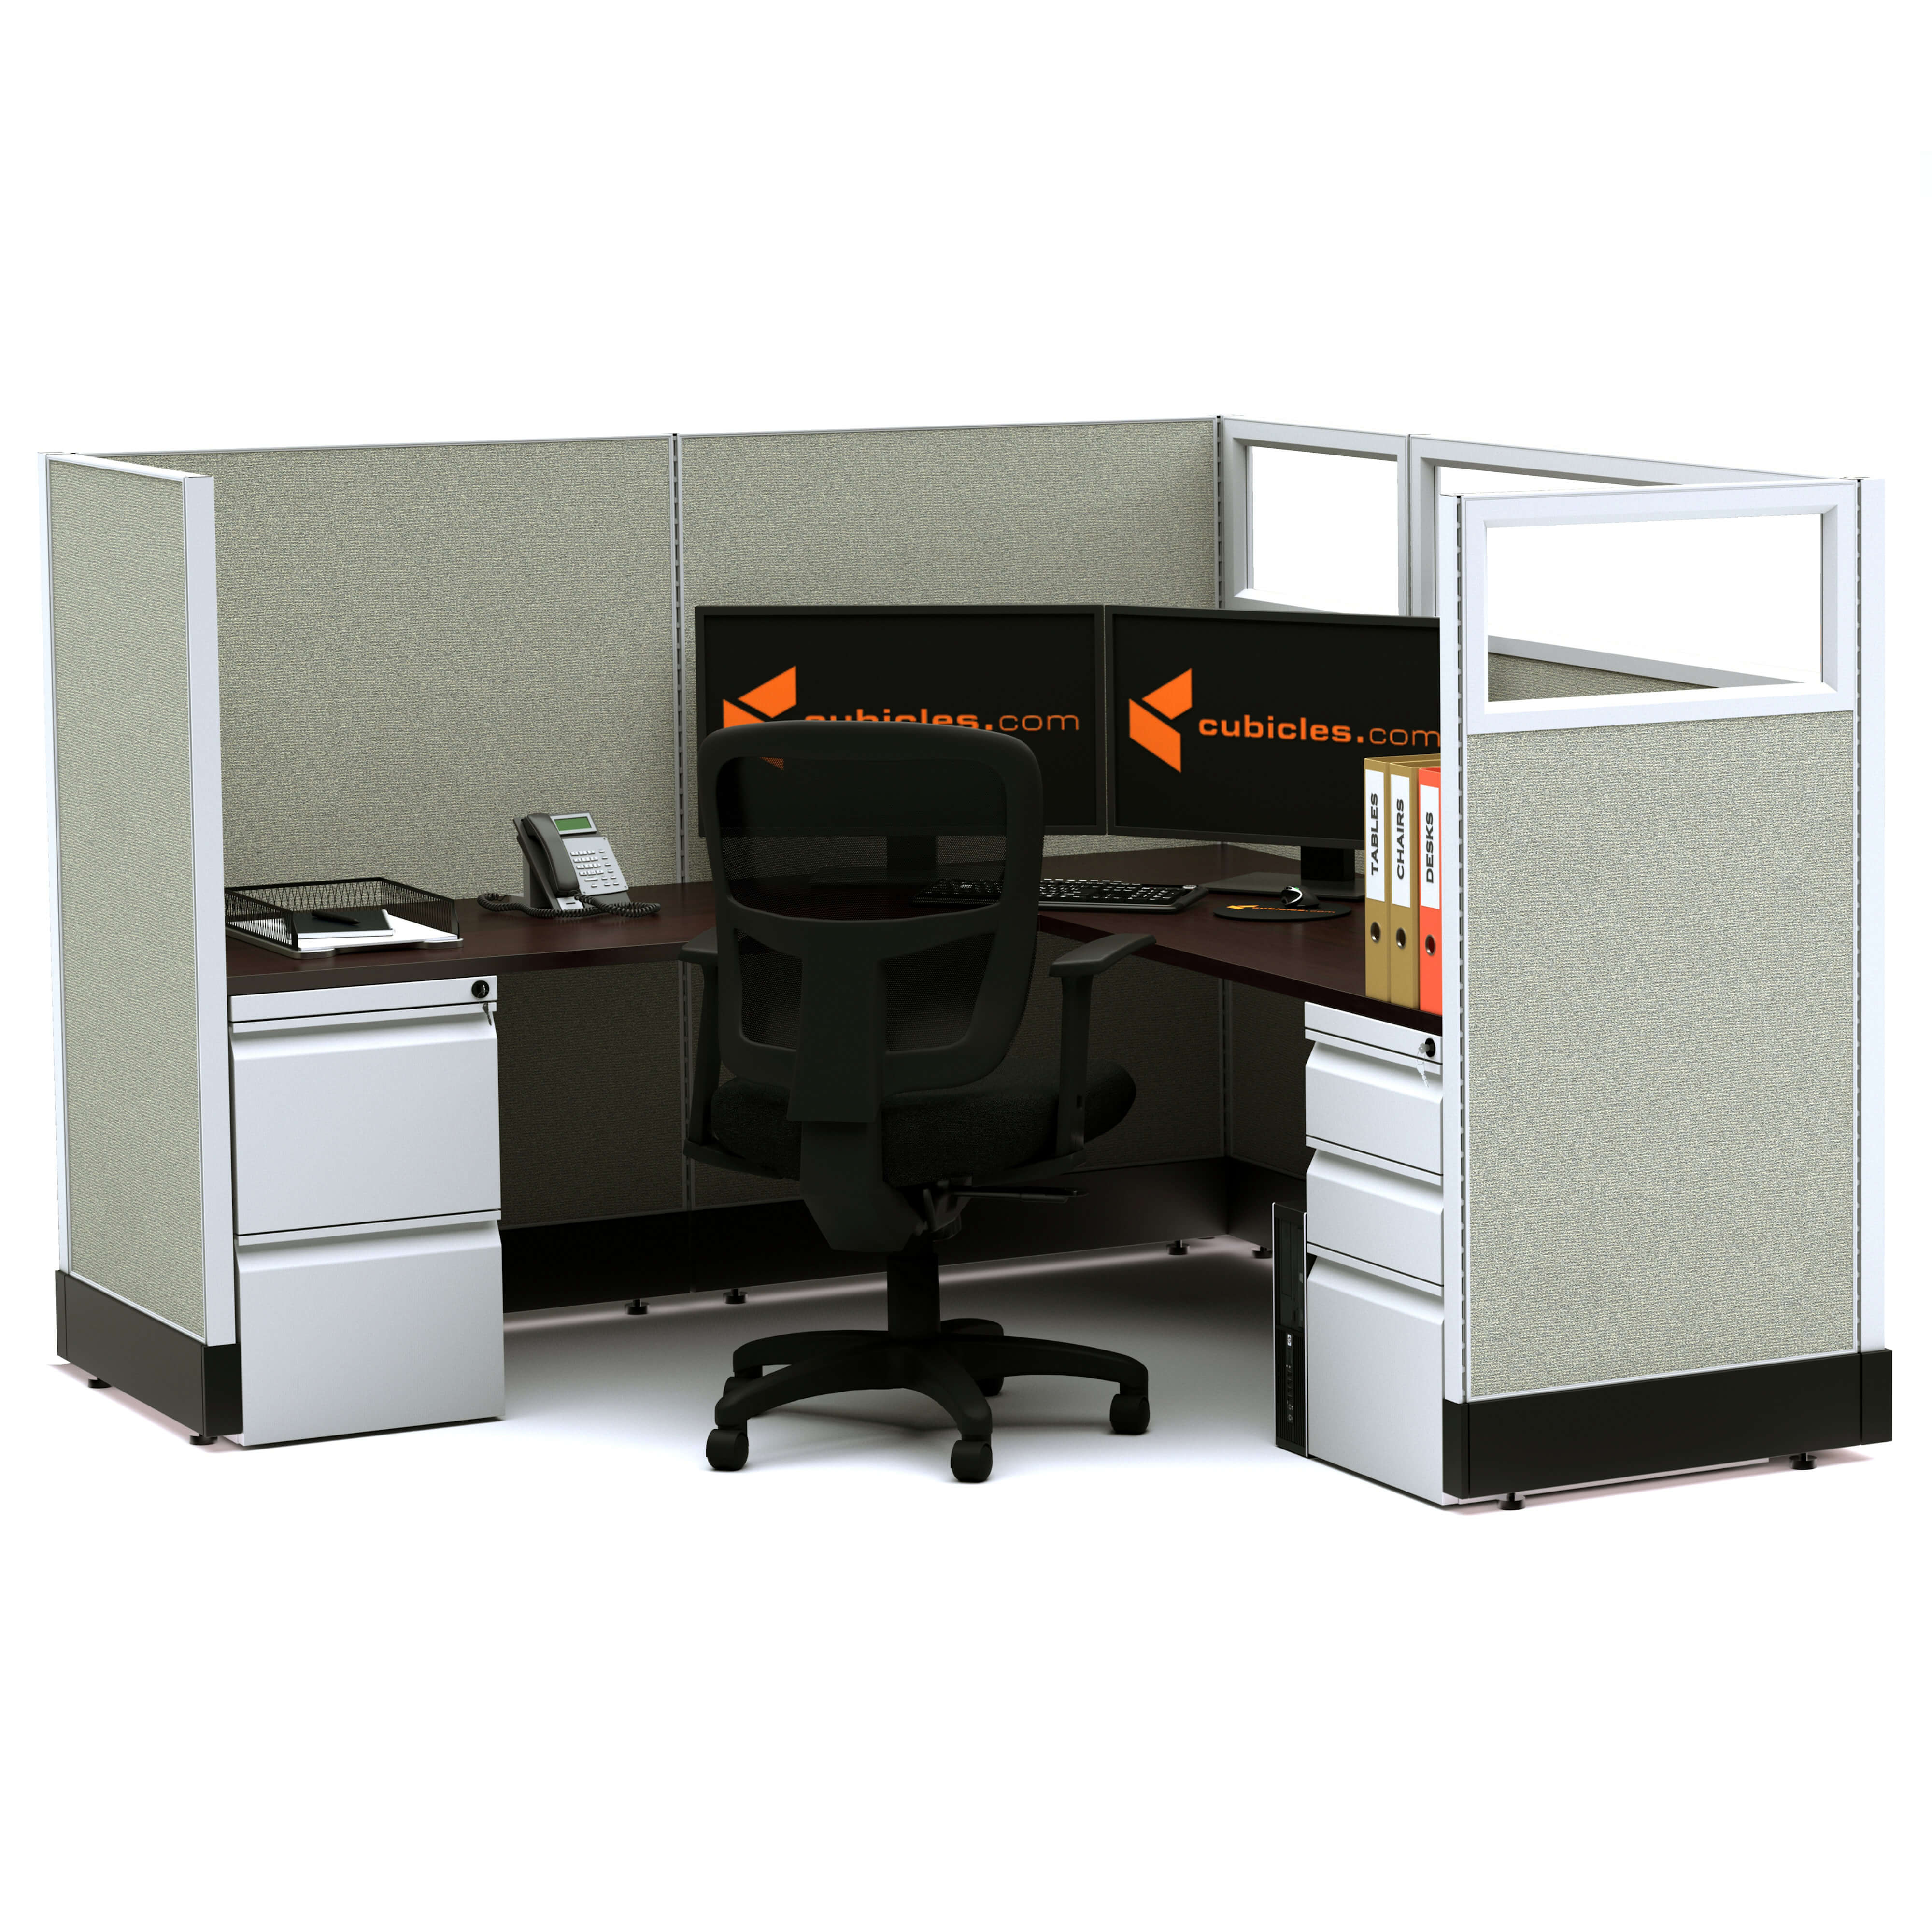 modular-office-furniture-partial-glass-office-cubicles-53h-single-powered.jpg